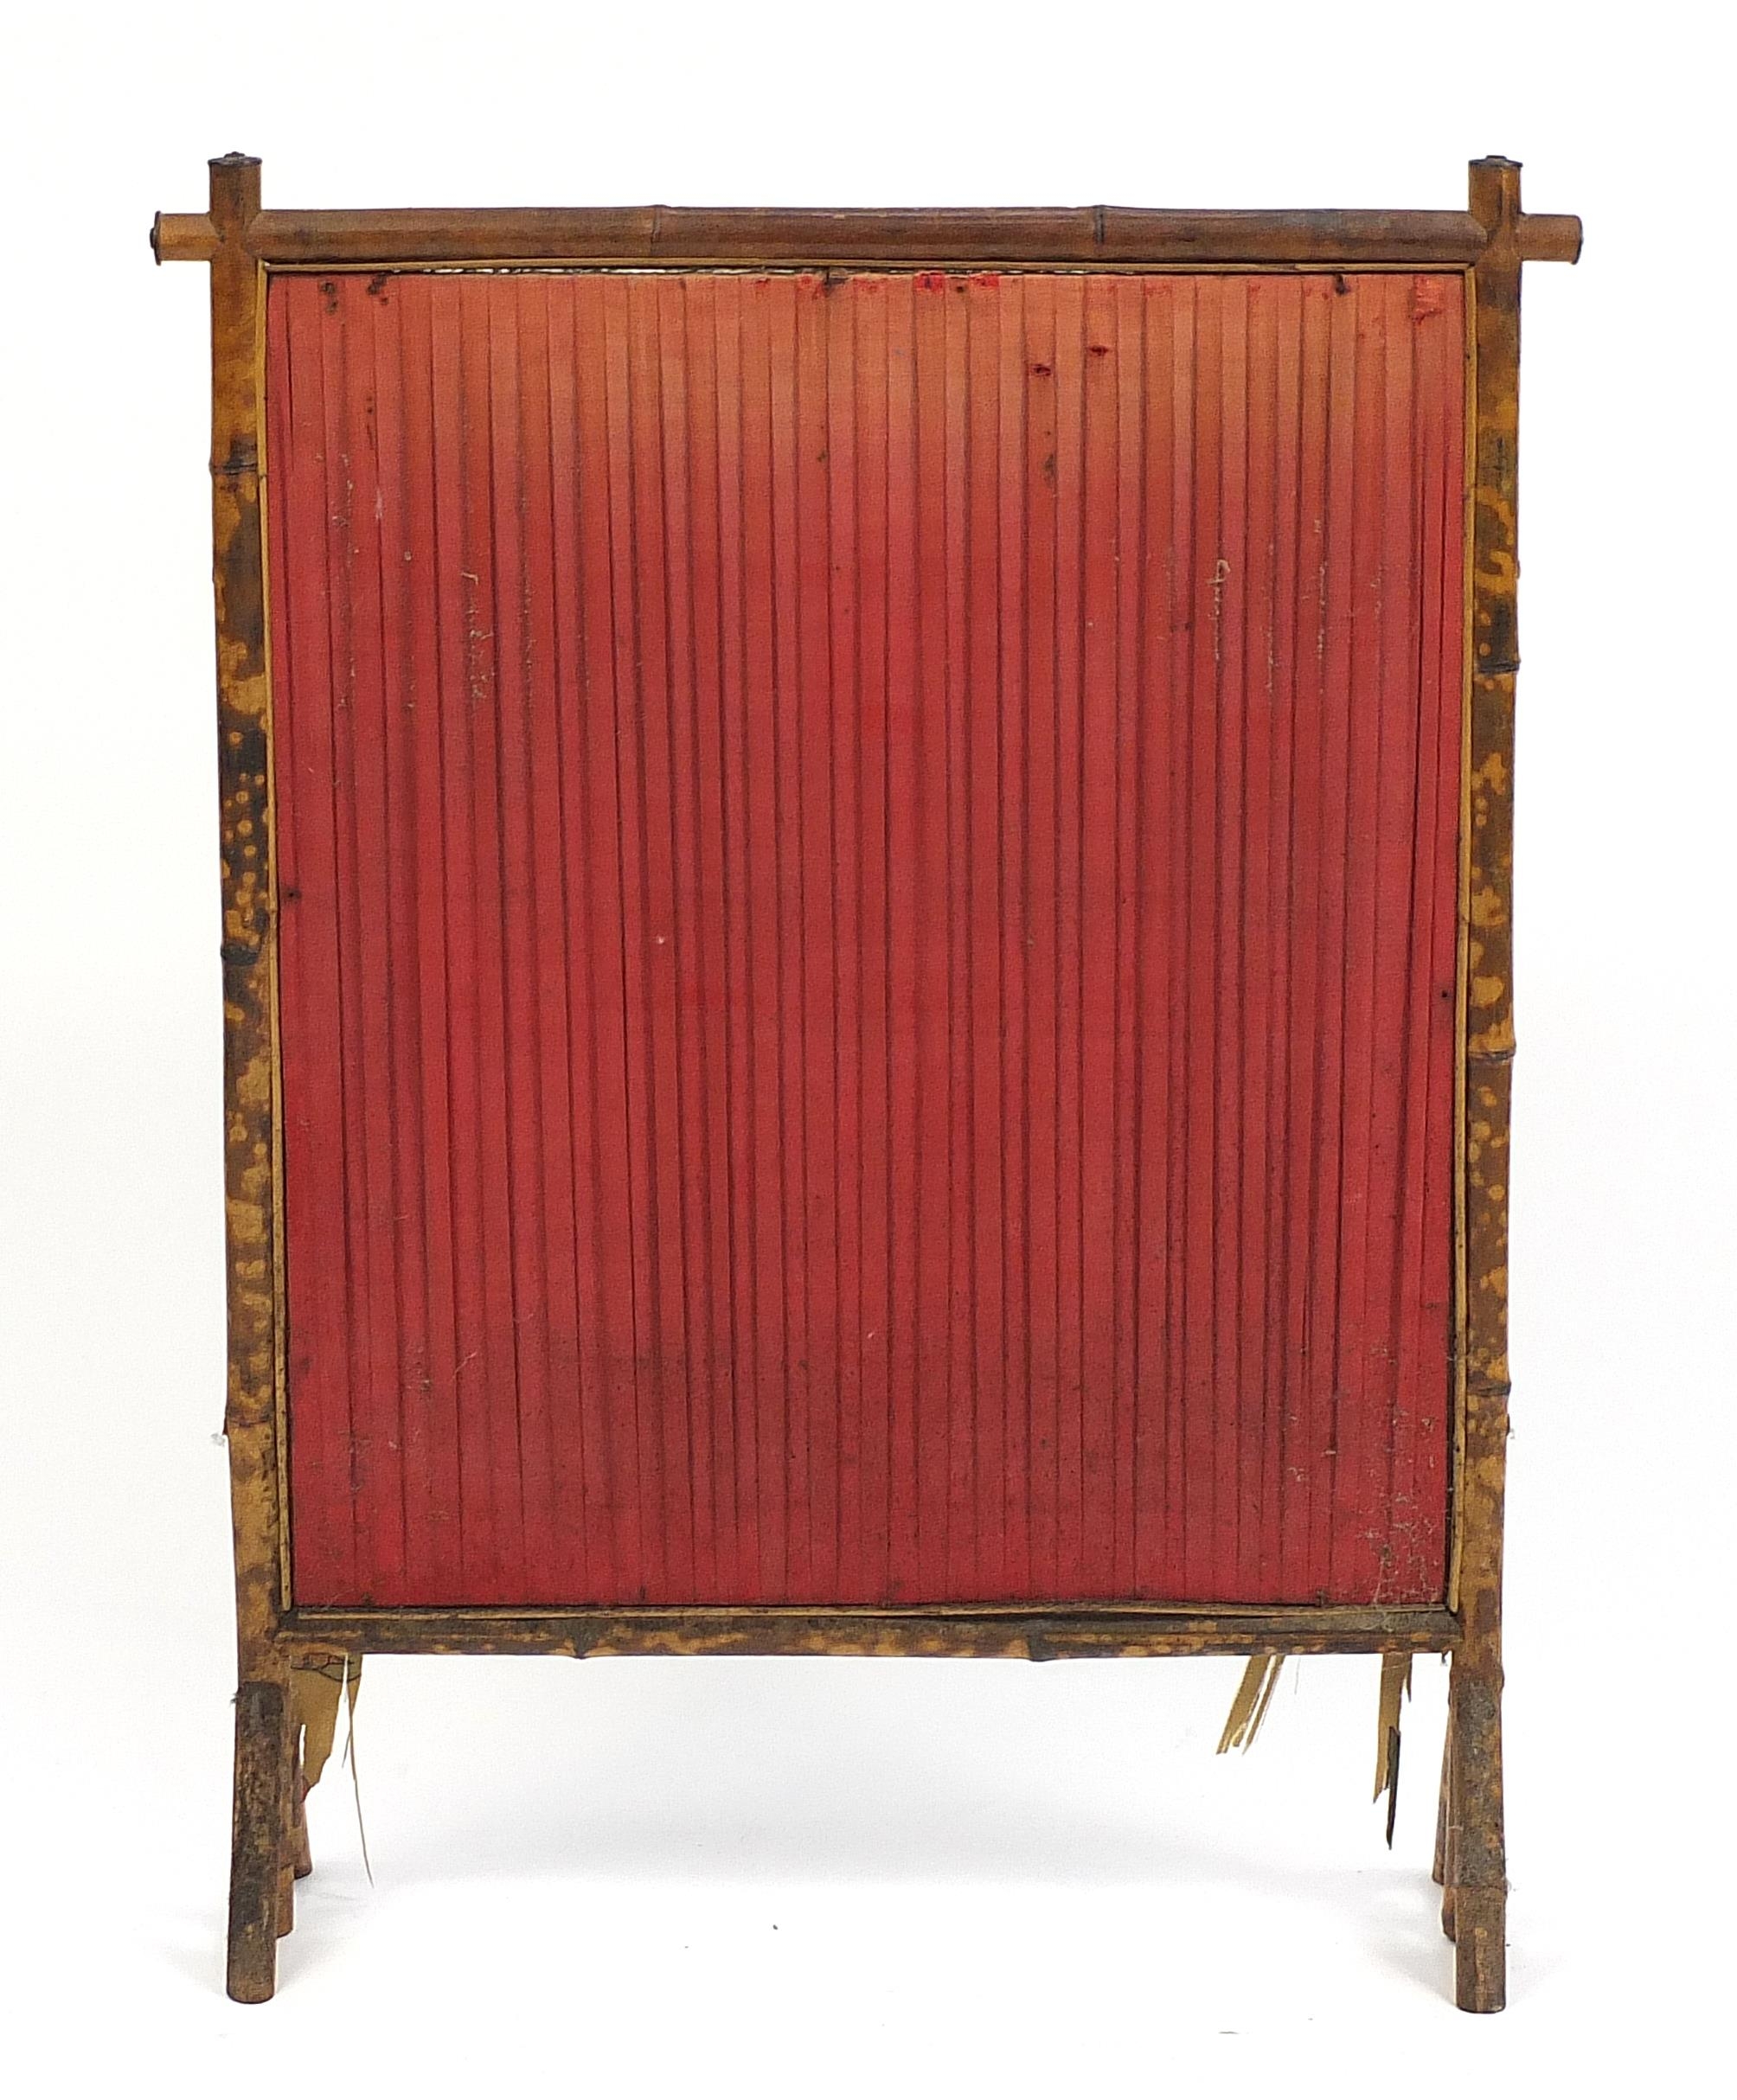 Japanese bamboo screen hand painted with figures, 96cm H x 72.5cm W - Image 2 of 2